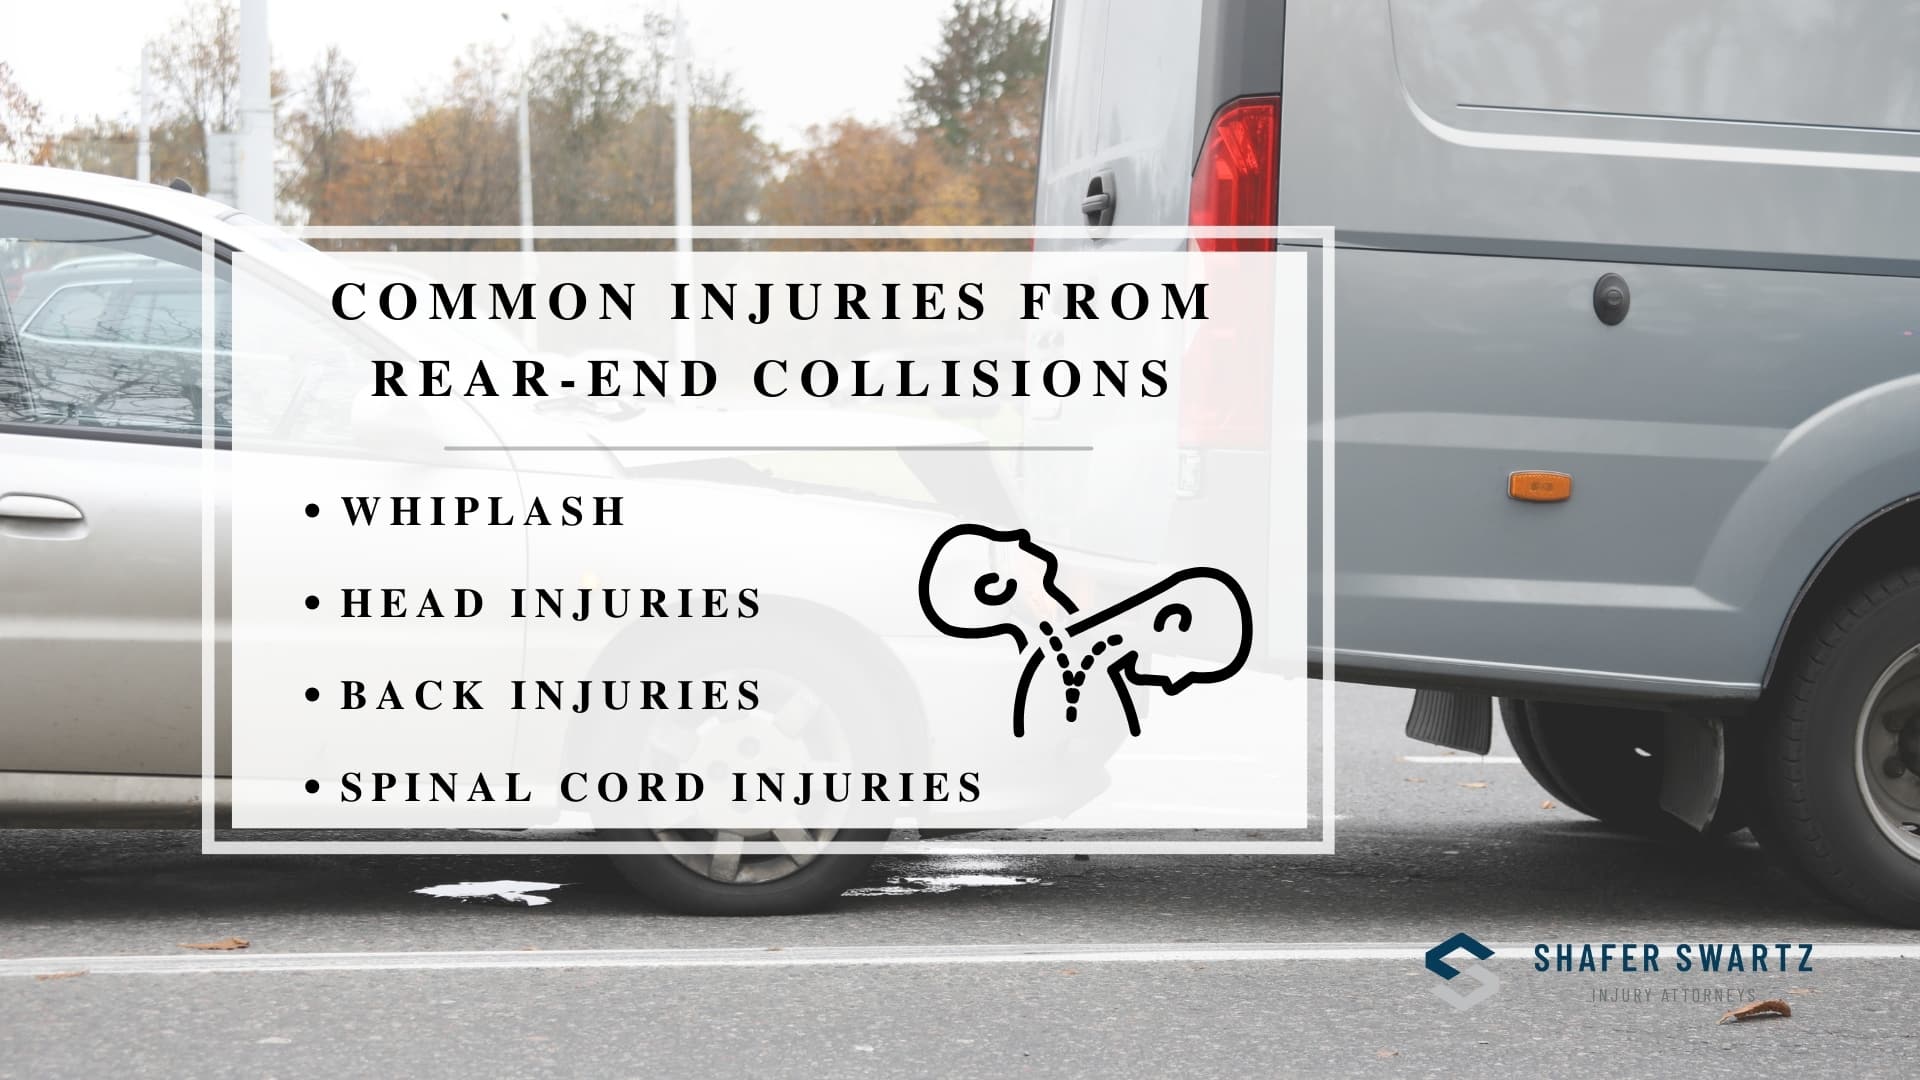 Infographic image of common injuries from rear-end collisions